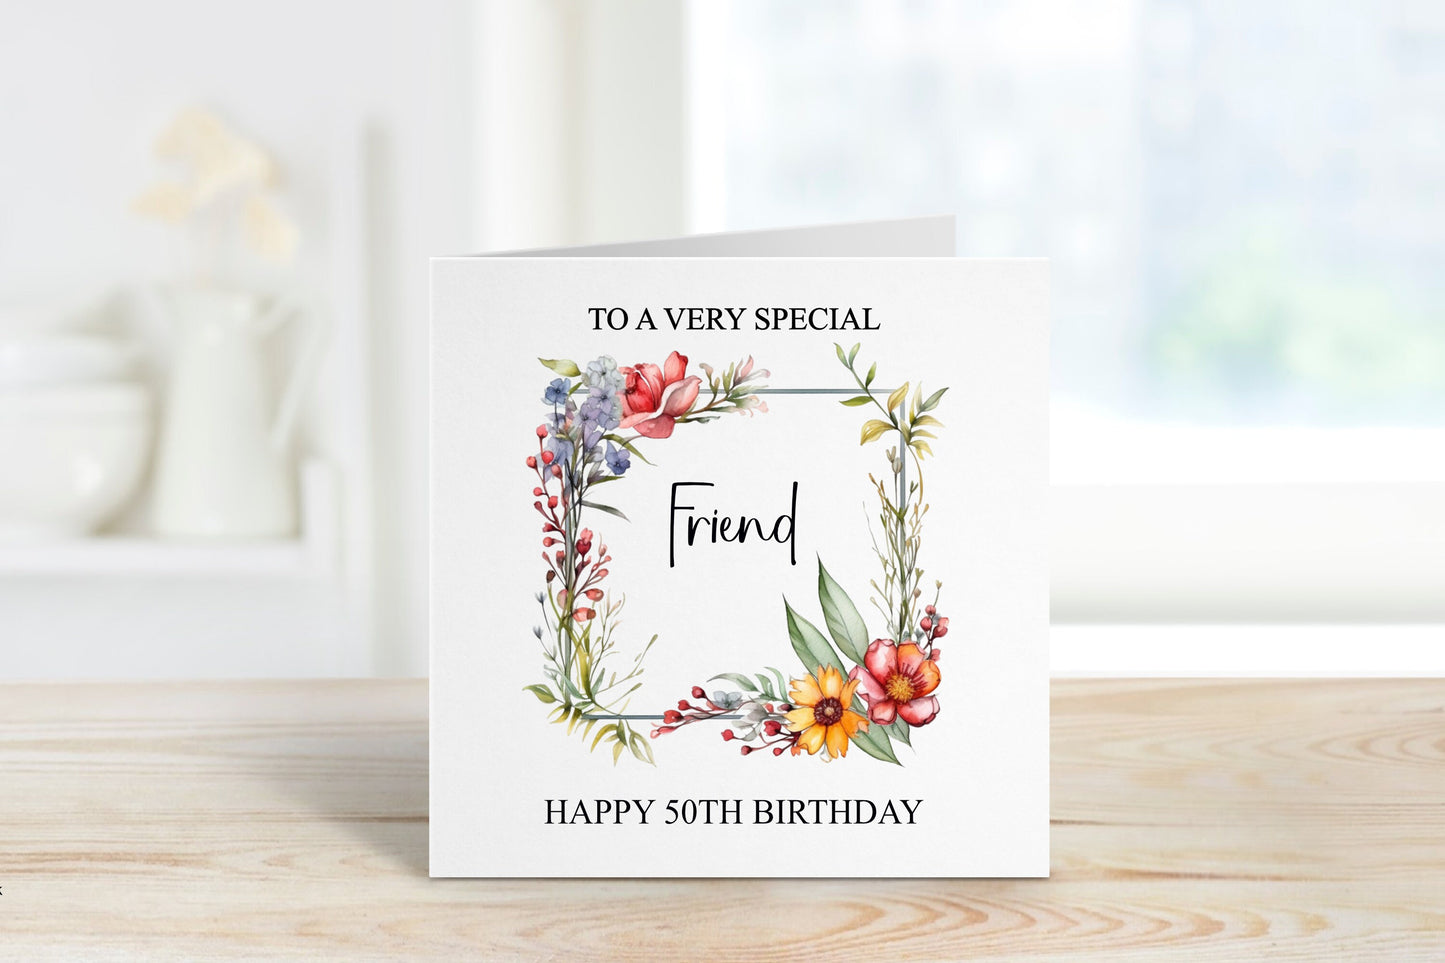 Personalised Godmother Birthday Card, Floral Frame Birthday Card For Her, Any Age Card 30, 40, 50, 60, 70, 80, 90